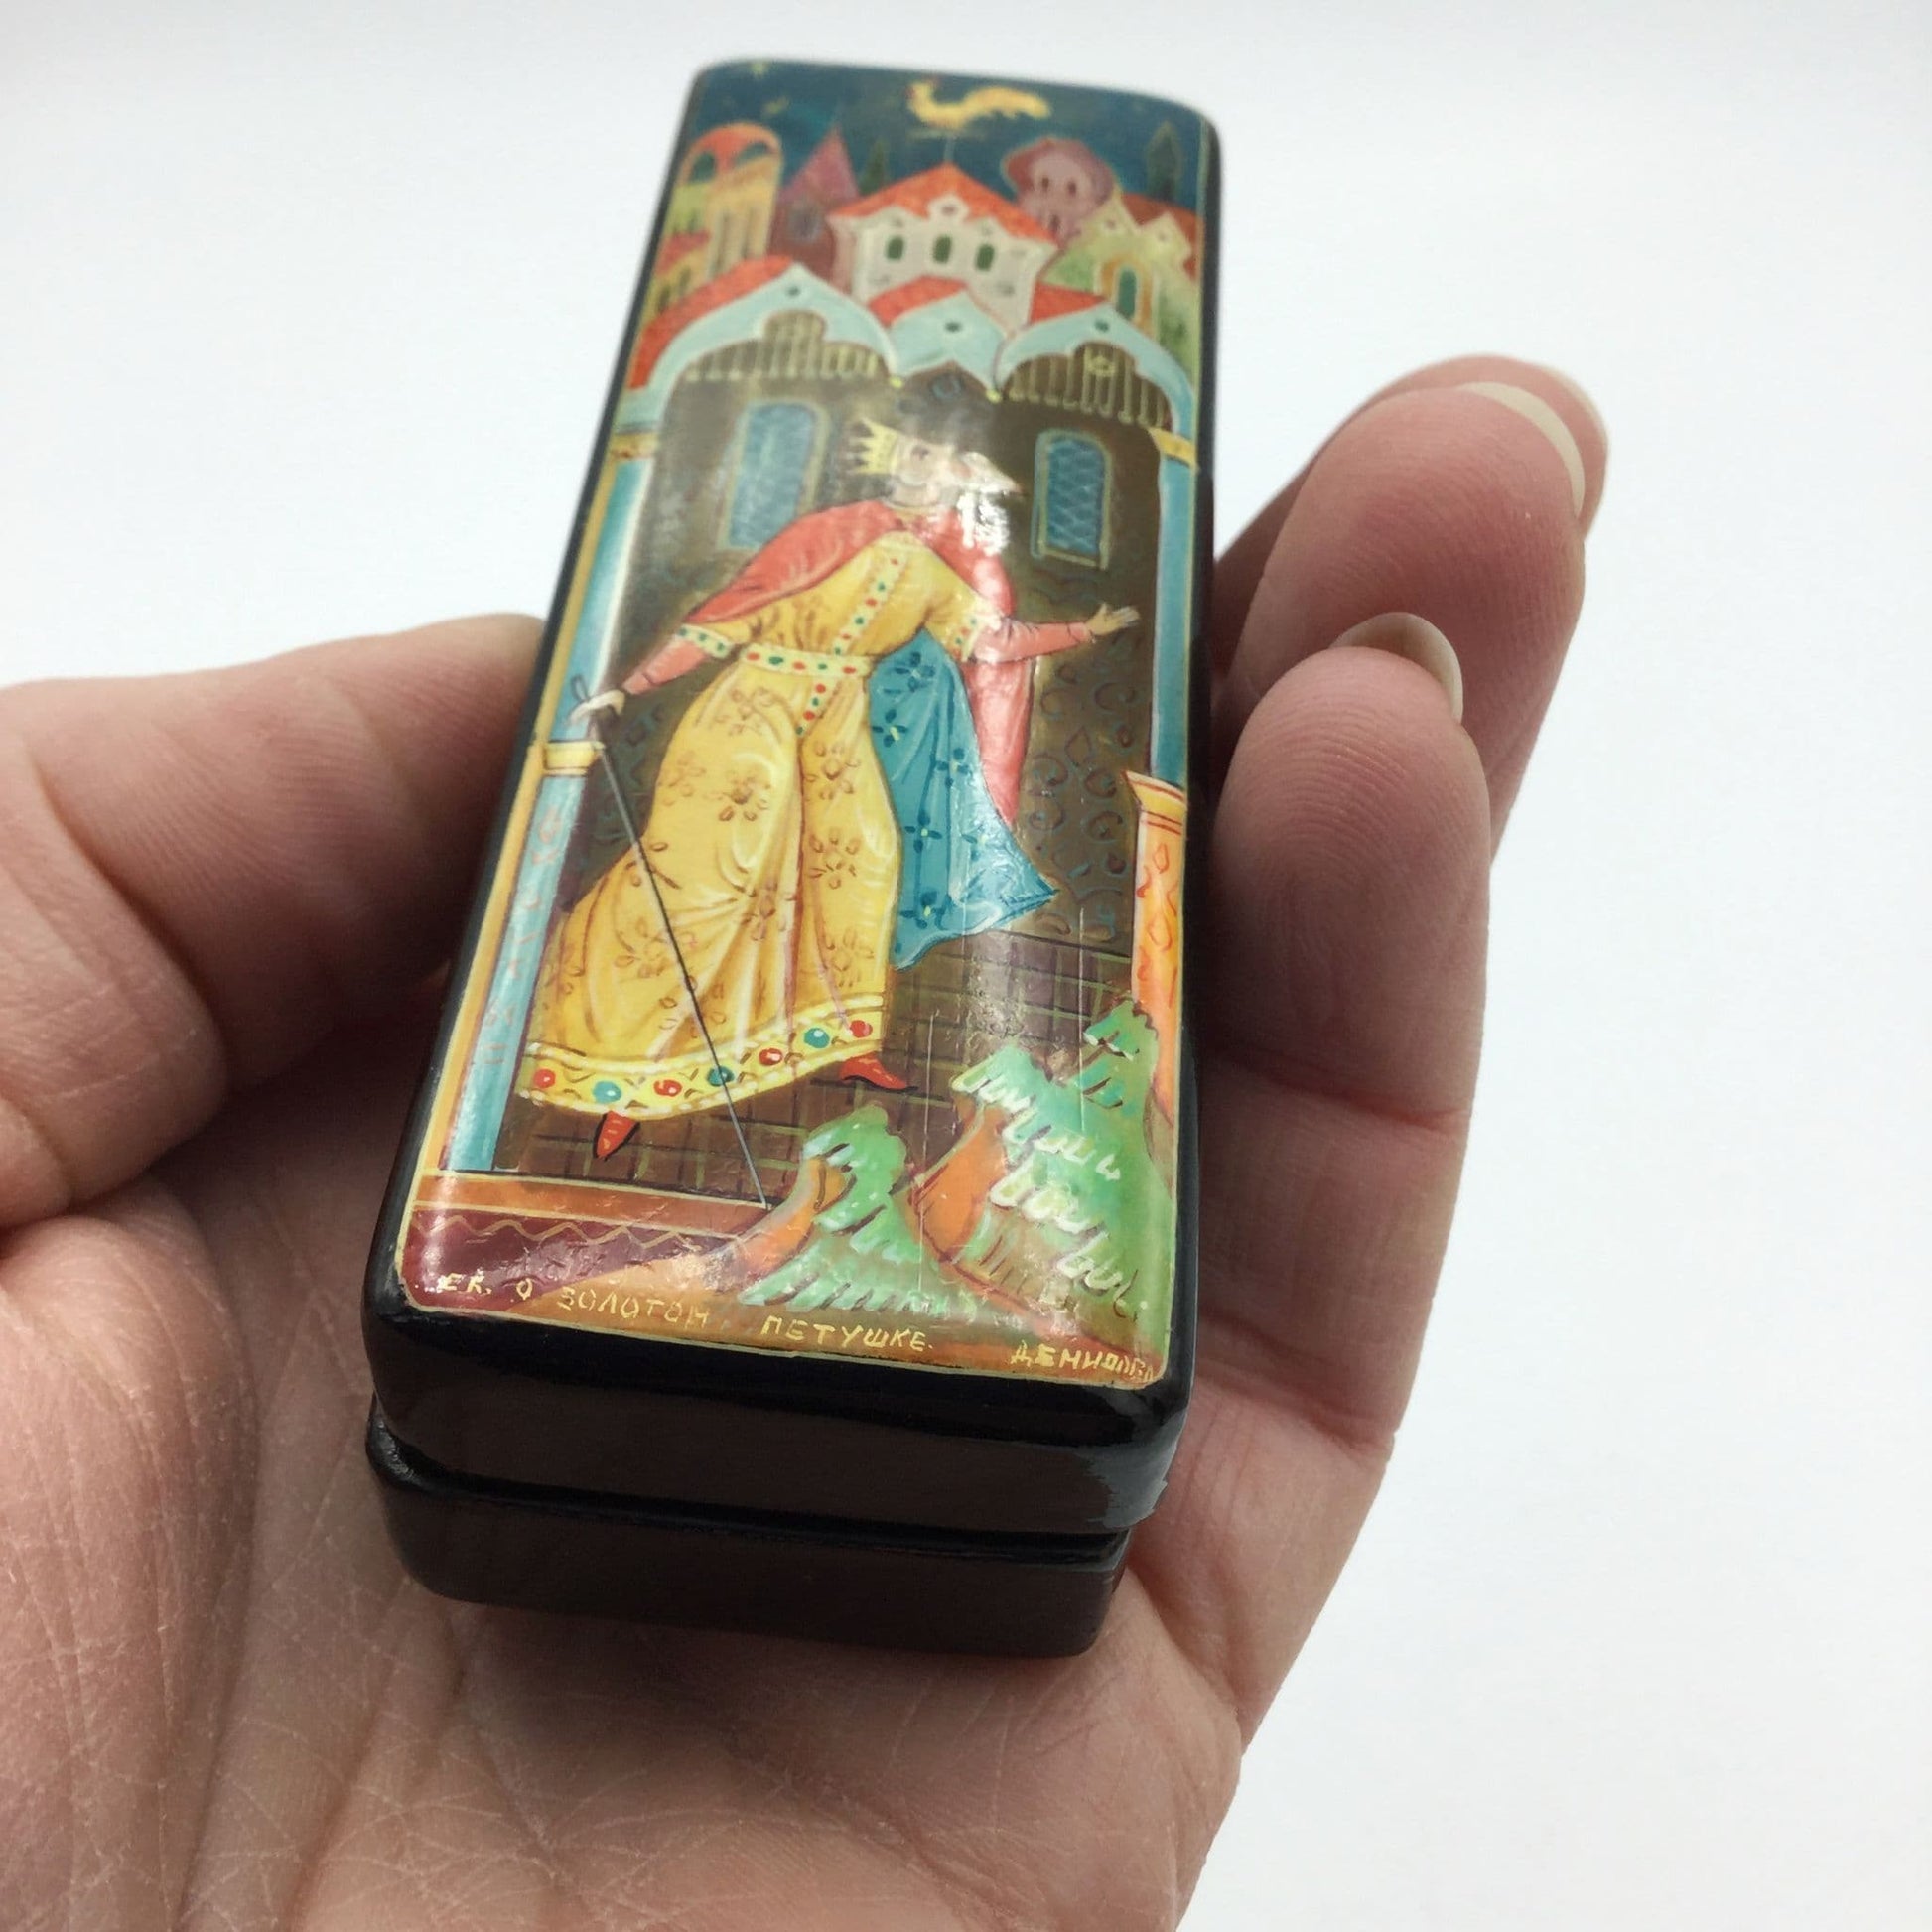 Black handpainted box with a colourful painting of a king looking at a cockerel above him held in a hand